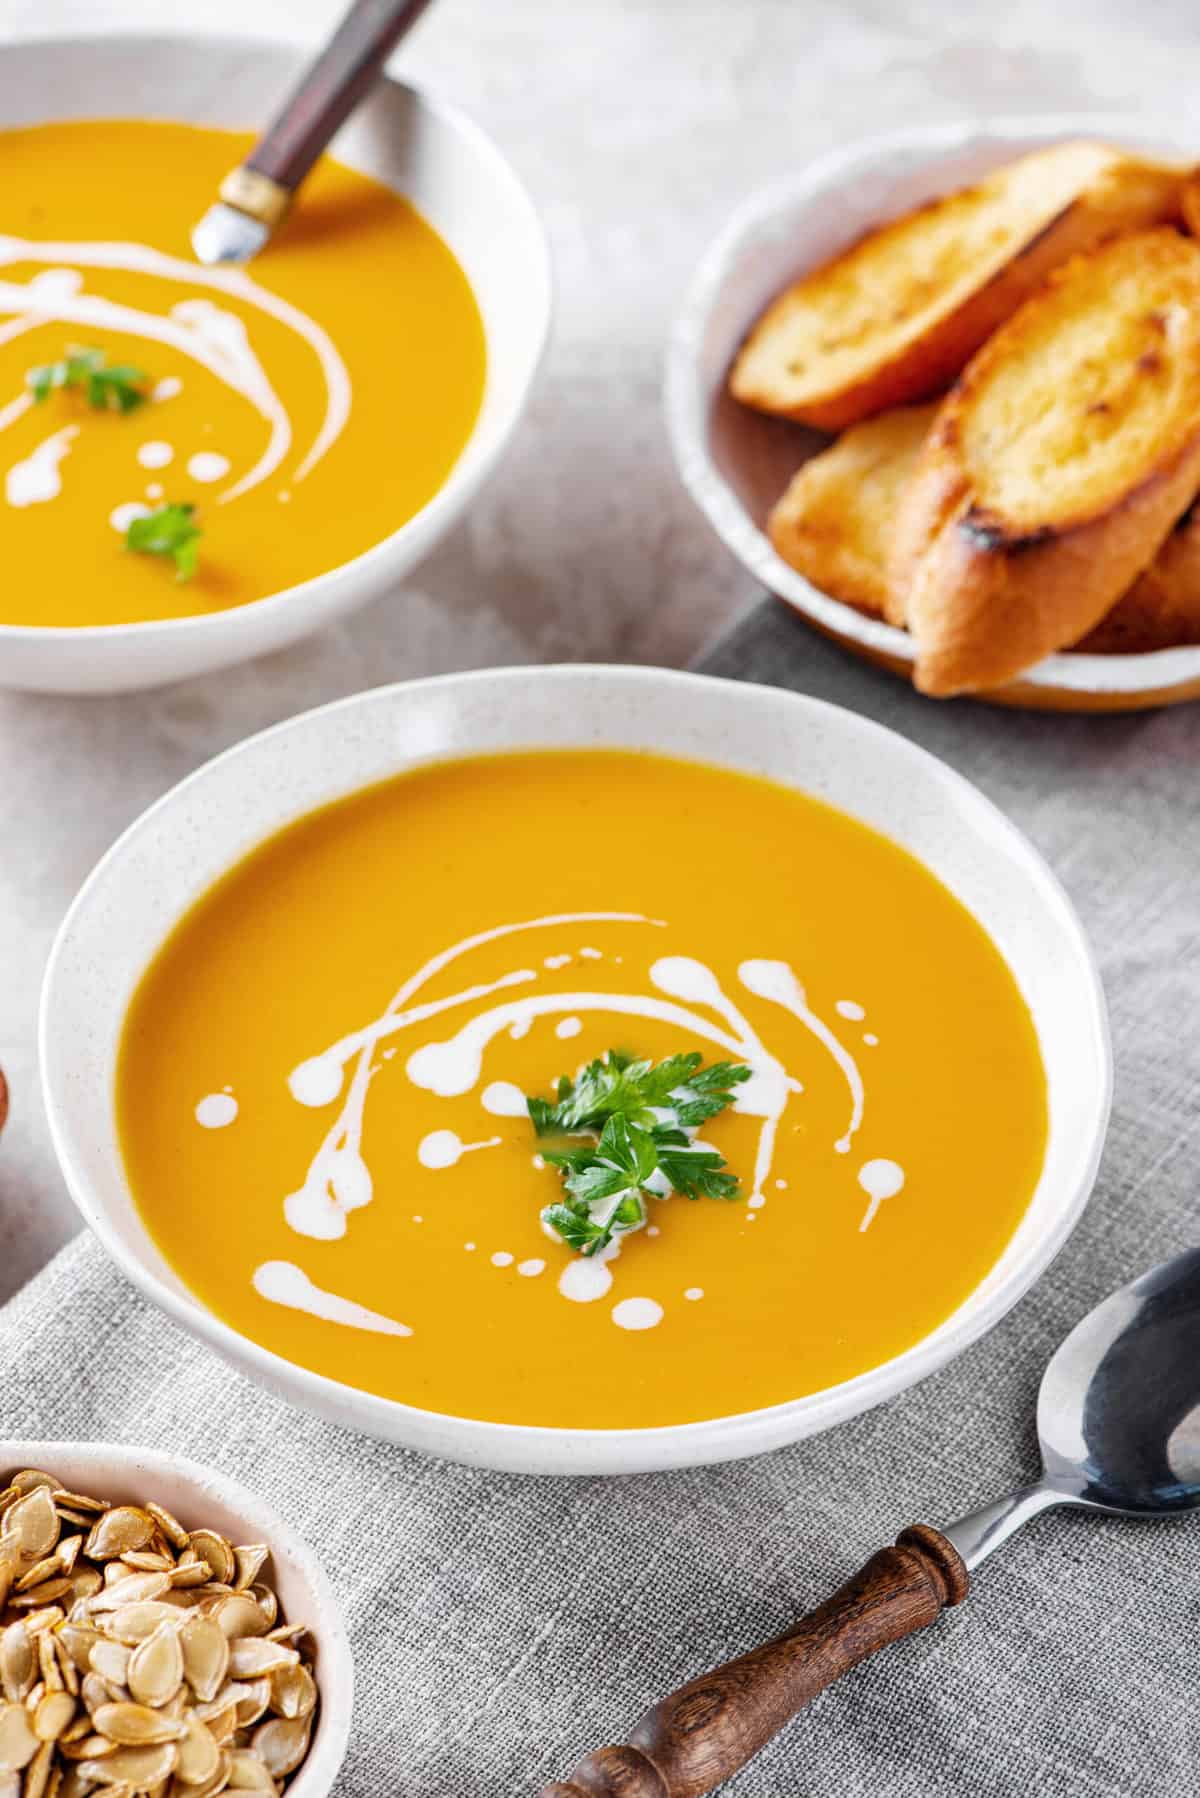 butternut squash soup with a sour cream swirl design and cilantro served in a white bowl